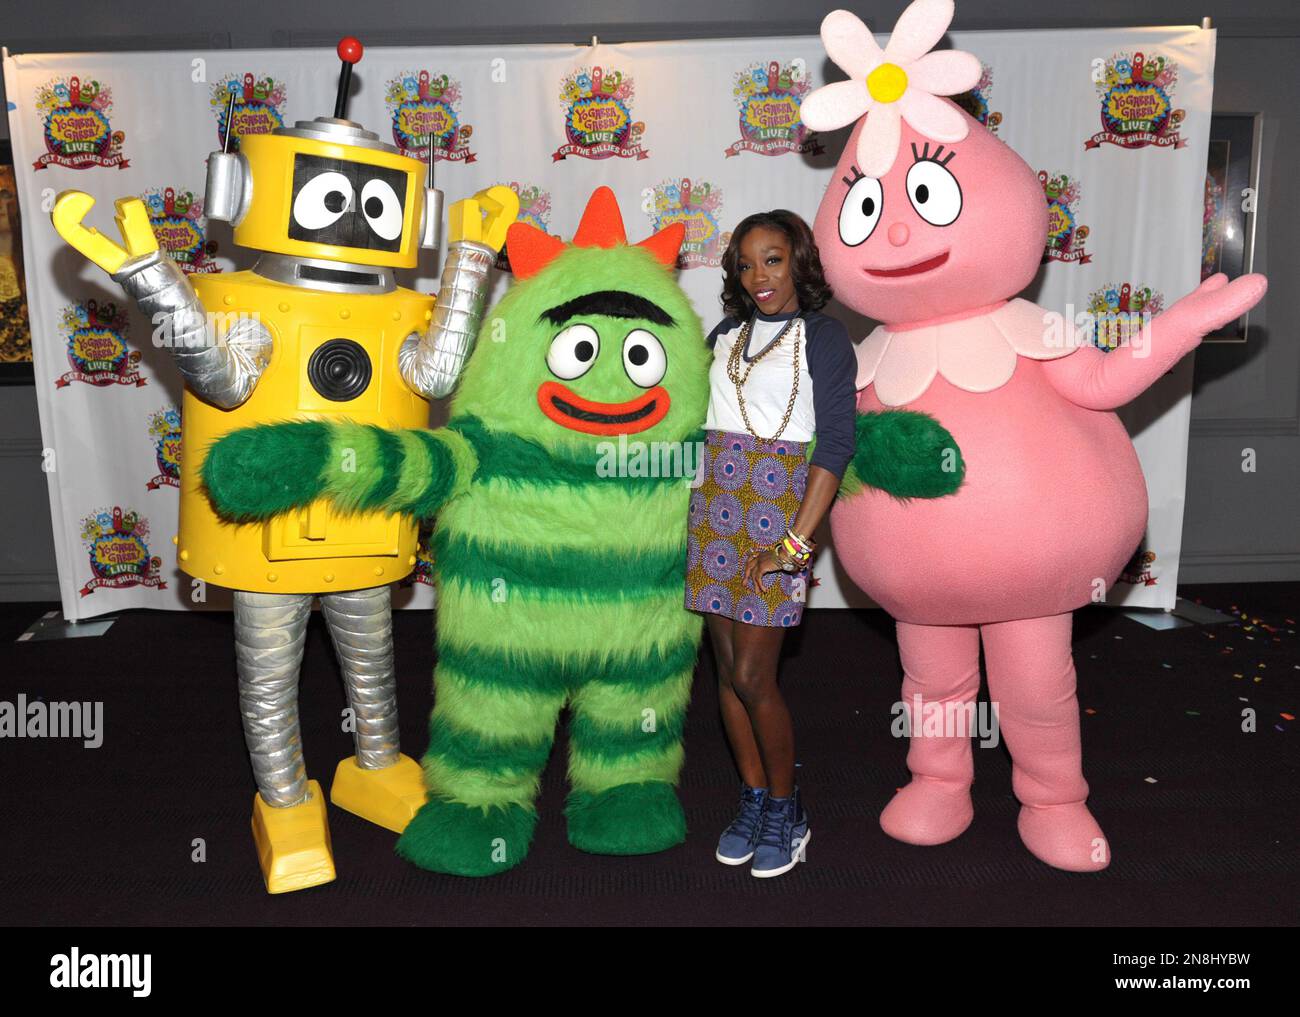 https://c8.alamy.com/comp/2N8HYBW/estelle-swaray-2nd-from-right-poses-with-plex-brobee-and-foofa-at-yo-gabba-gabba!-live!-get-the-sillies-out!-50-city-tour-kick-off-performance-on-thanksgiving-weekend-at-nokia-theatre-la-live-on-friday-nov-23-2012-in-los-angeles-photo-by-john-shearerinvision-for-gabbacadabra-llcap-images-2N8HYBW.jpg